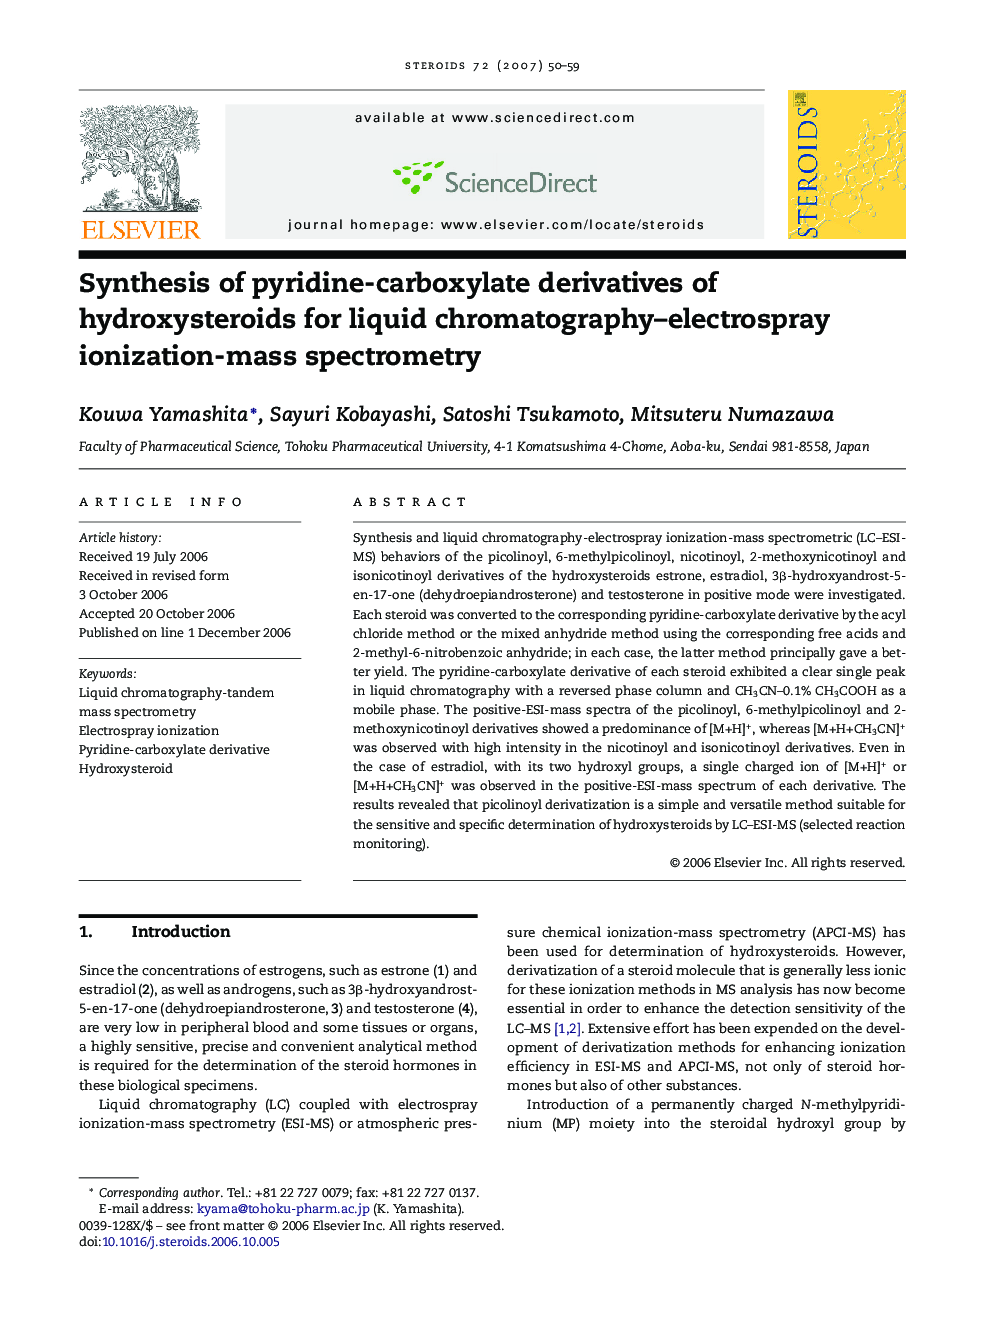 Synthesis of pyridine-carboxylate derivatives of hydroxysteroids for liquid chromatography–electrospray ionization-mass spectrometry